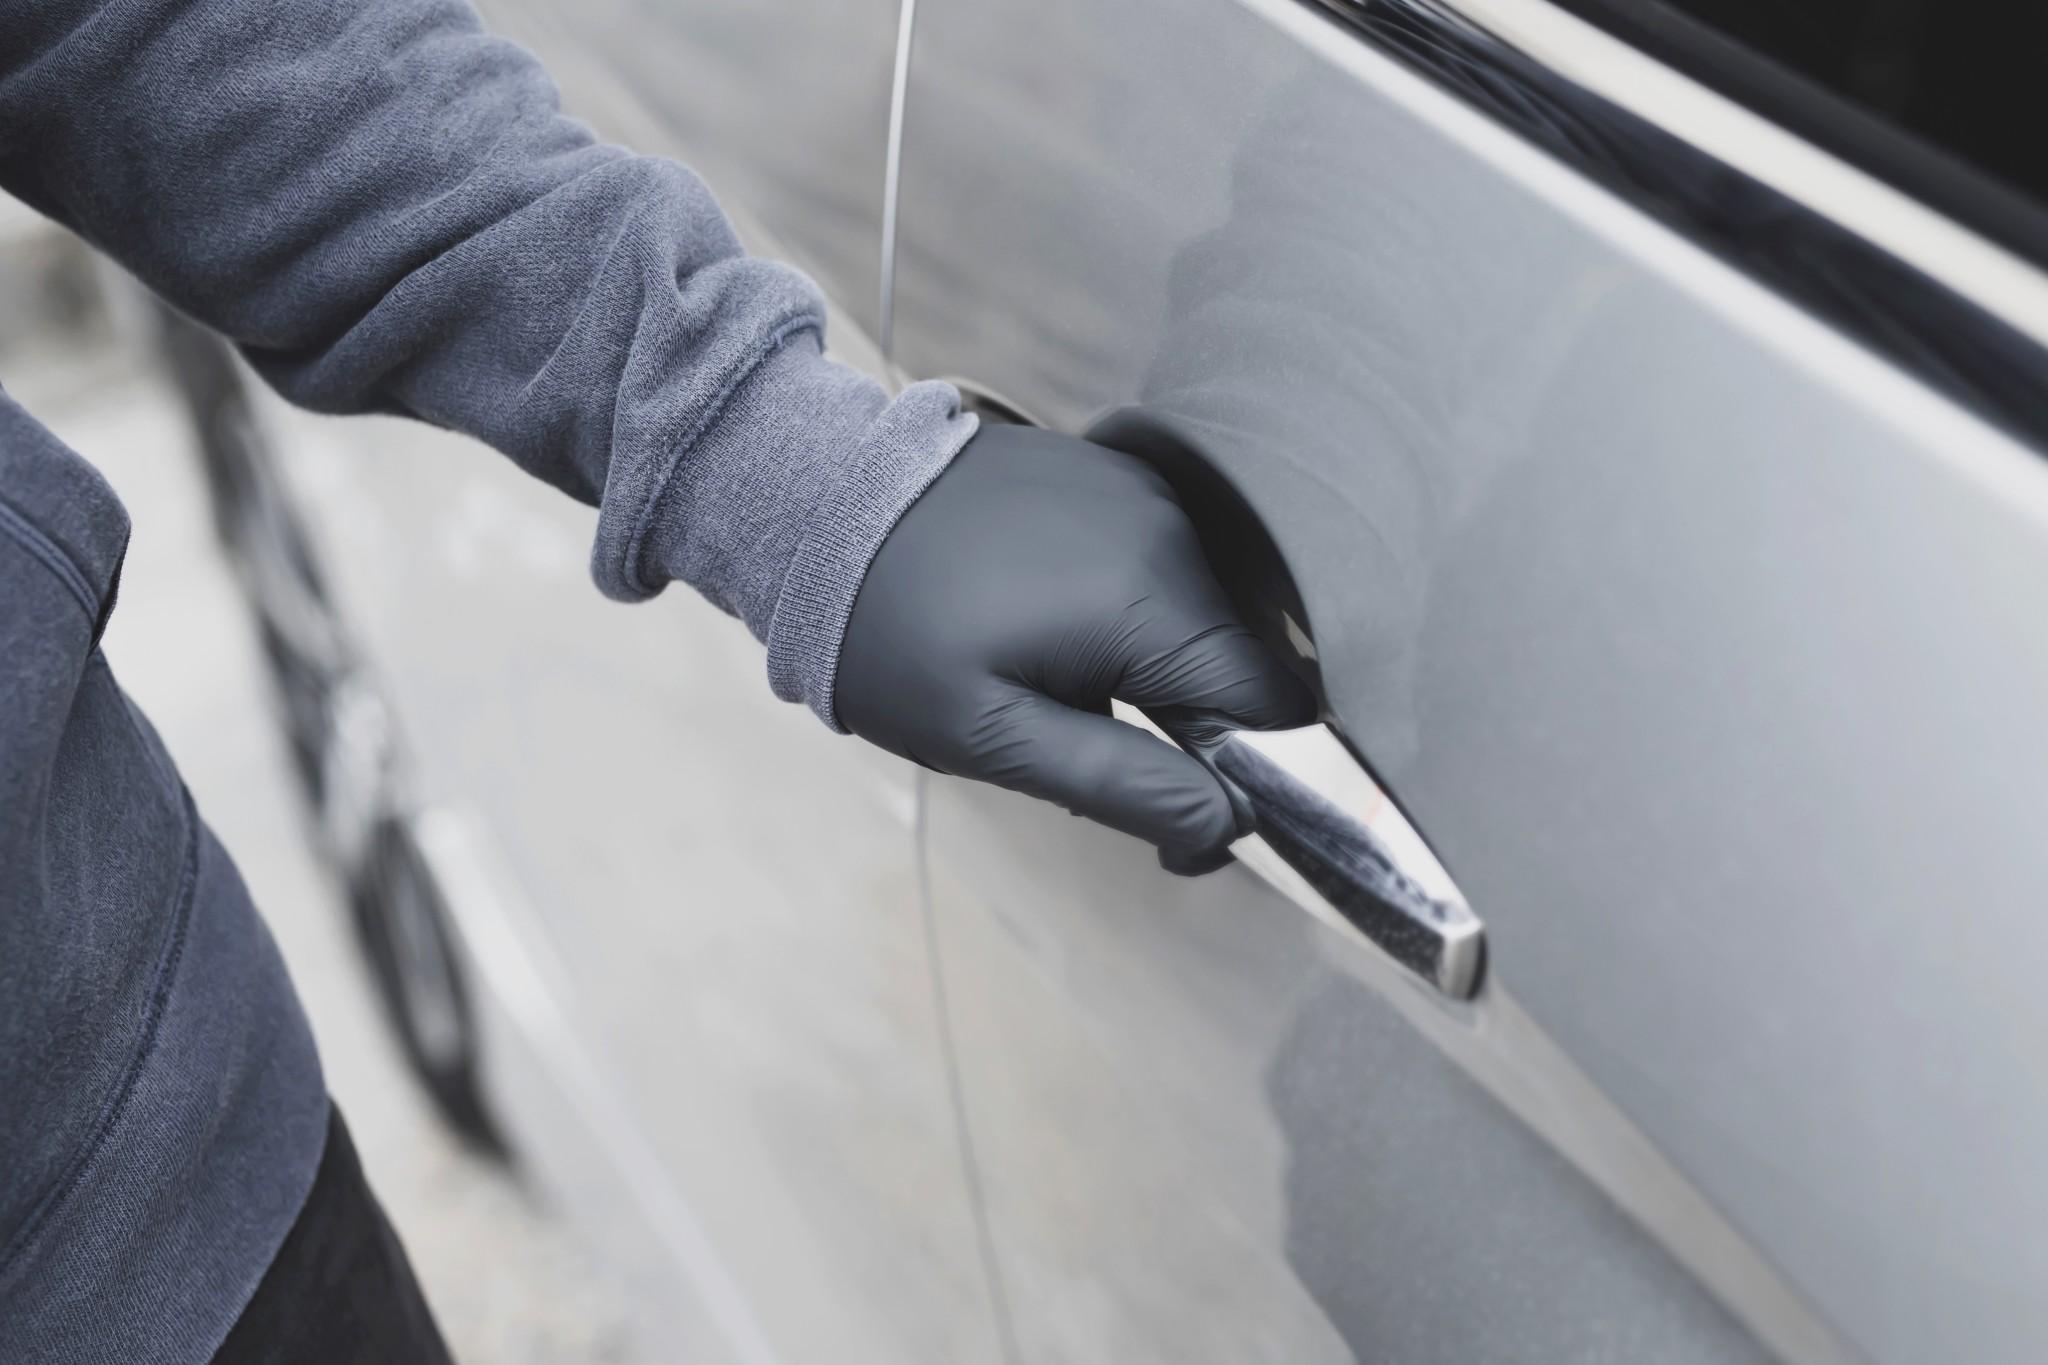 A gloved thief's hand on the door handle of a car